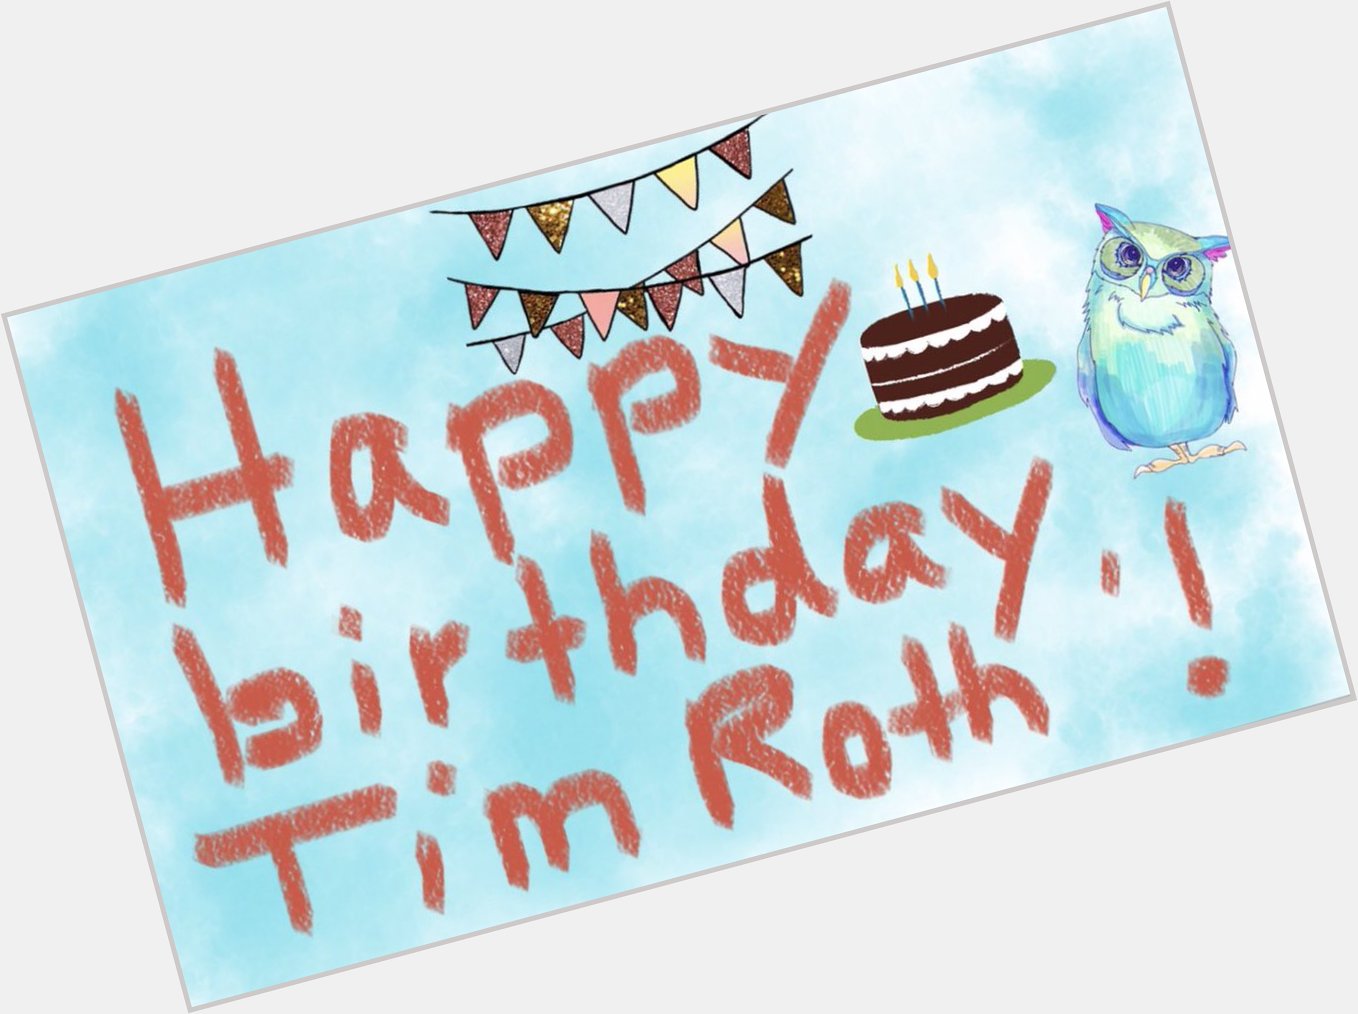 Wishing a very happy birthday to the talented Tim Roth. 